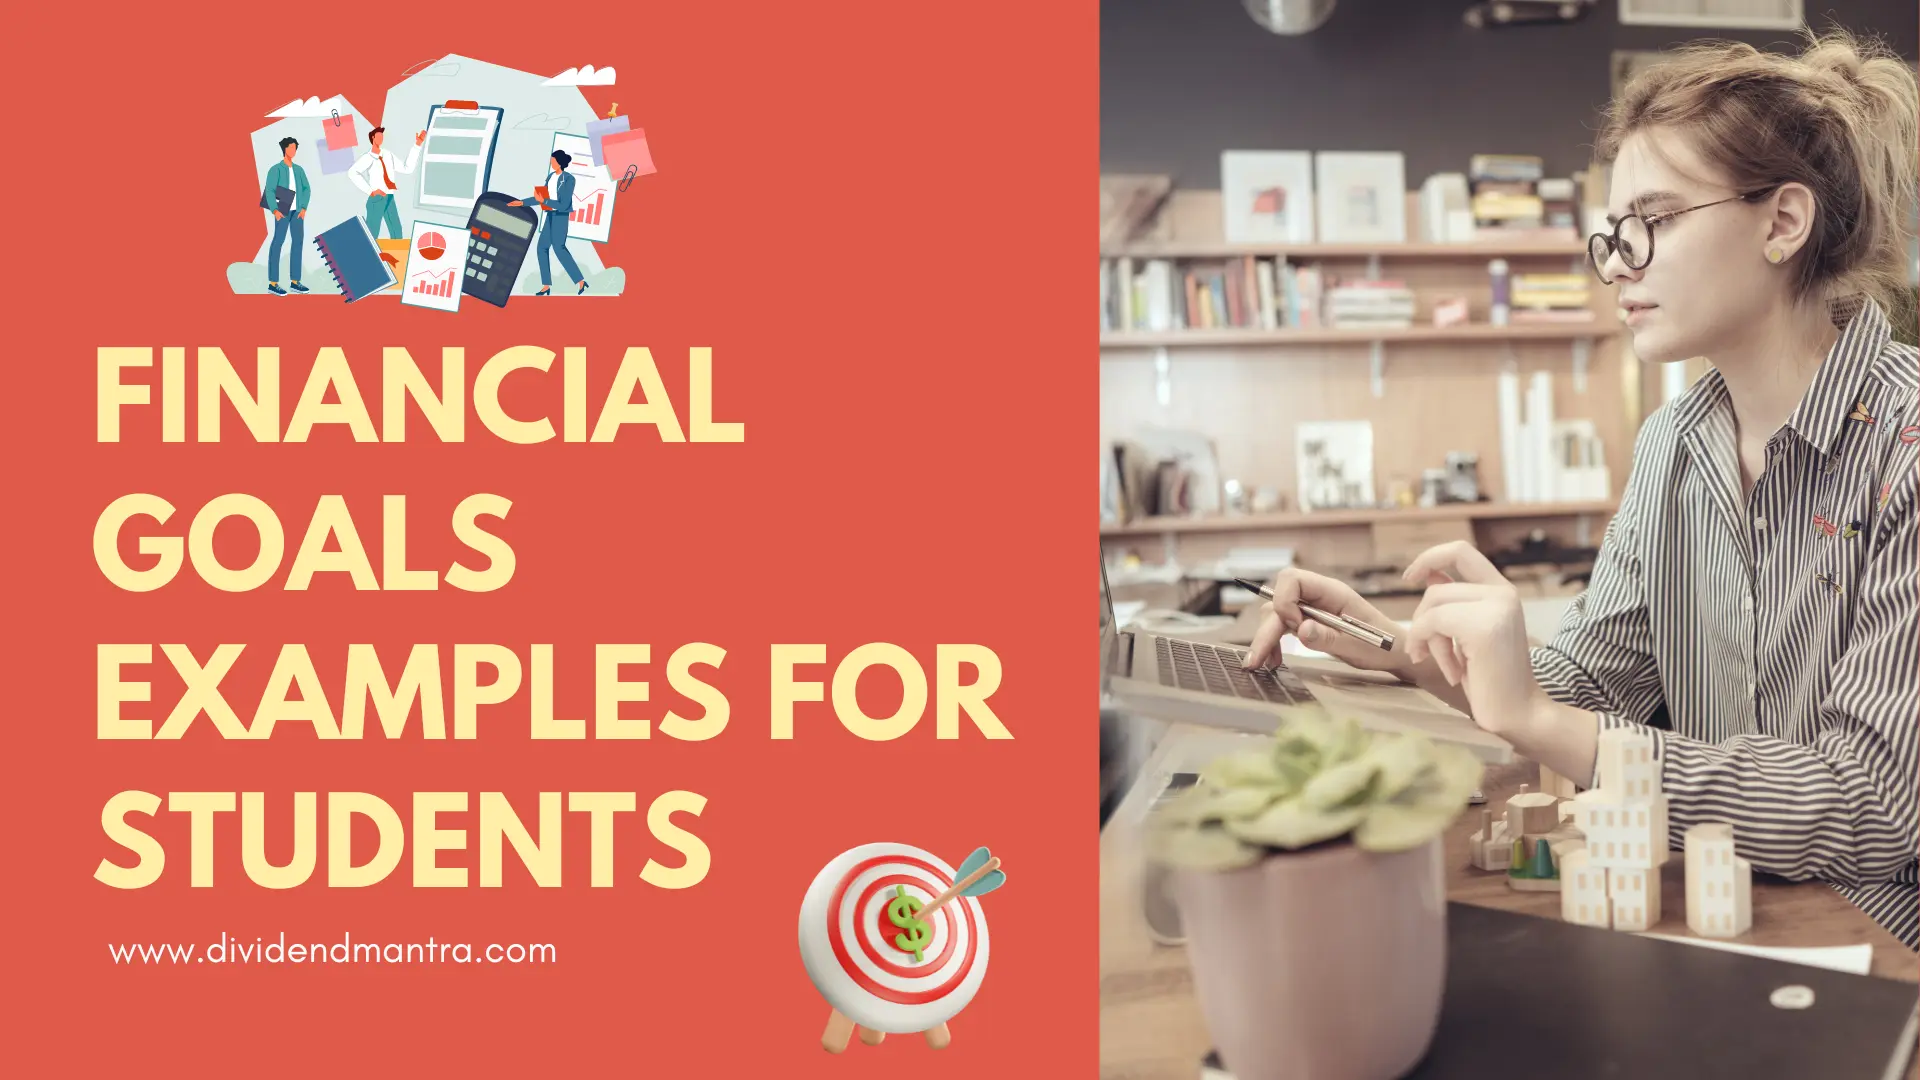 Financial Goals Examples for Students